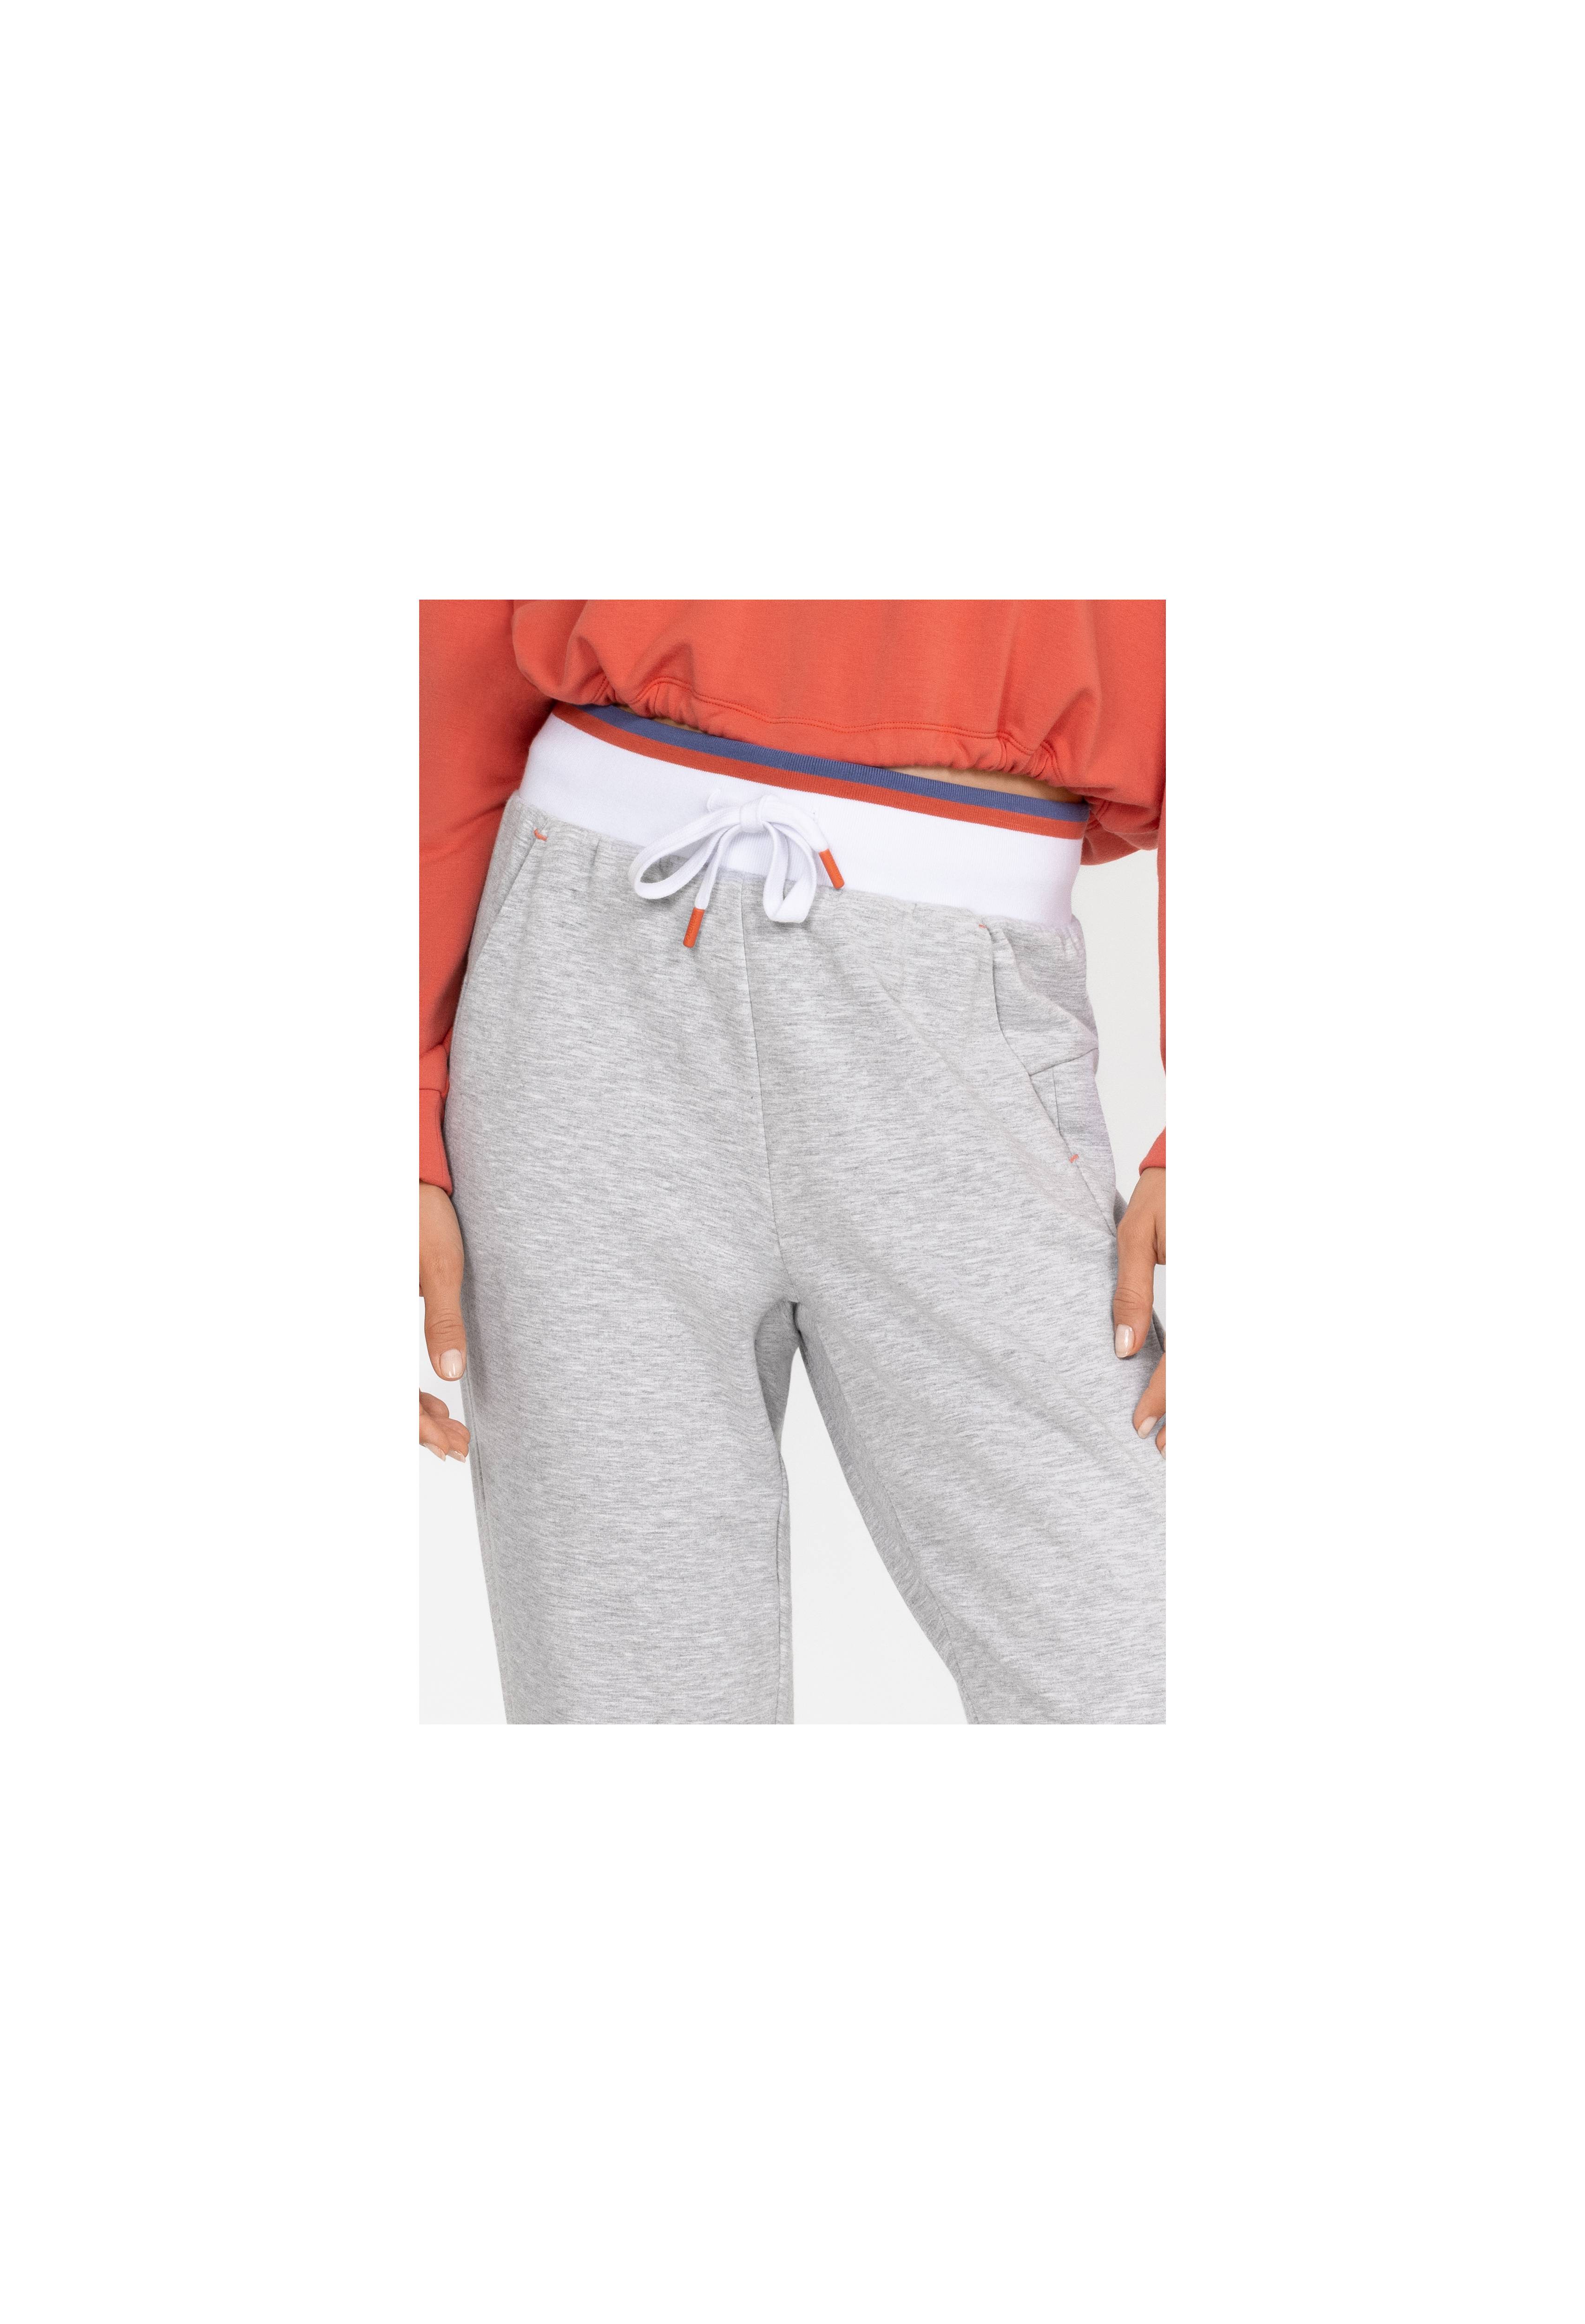 Tipped Forward Seam Jogger, , large image number 5